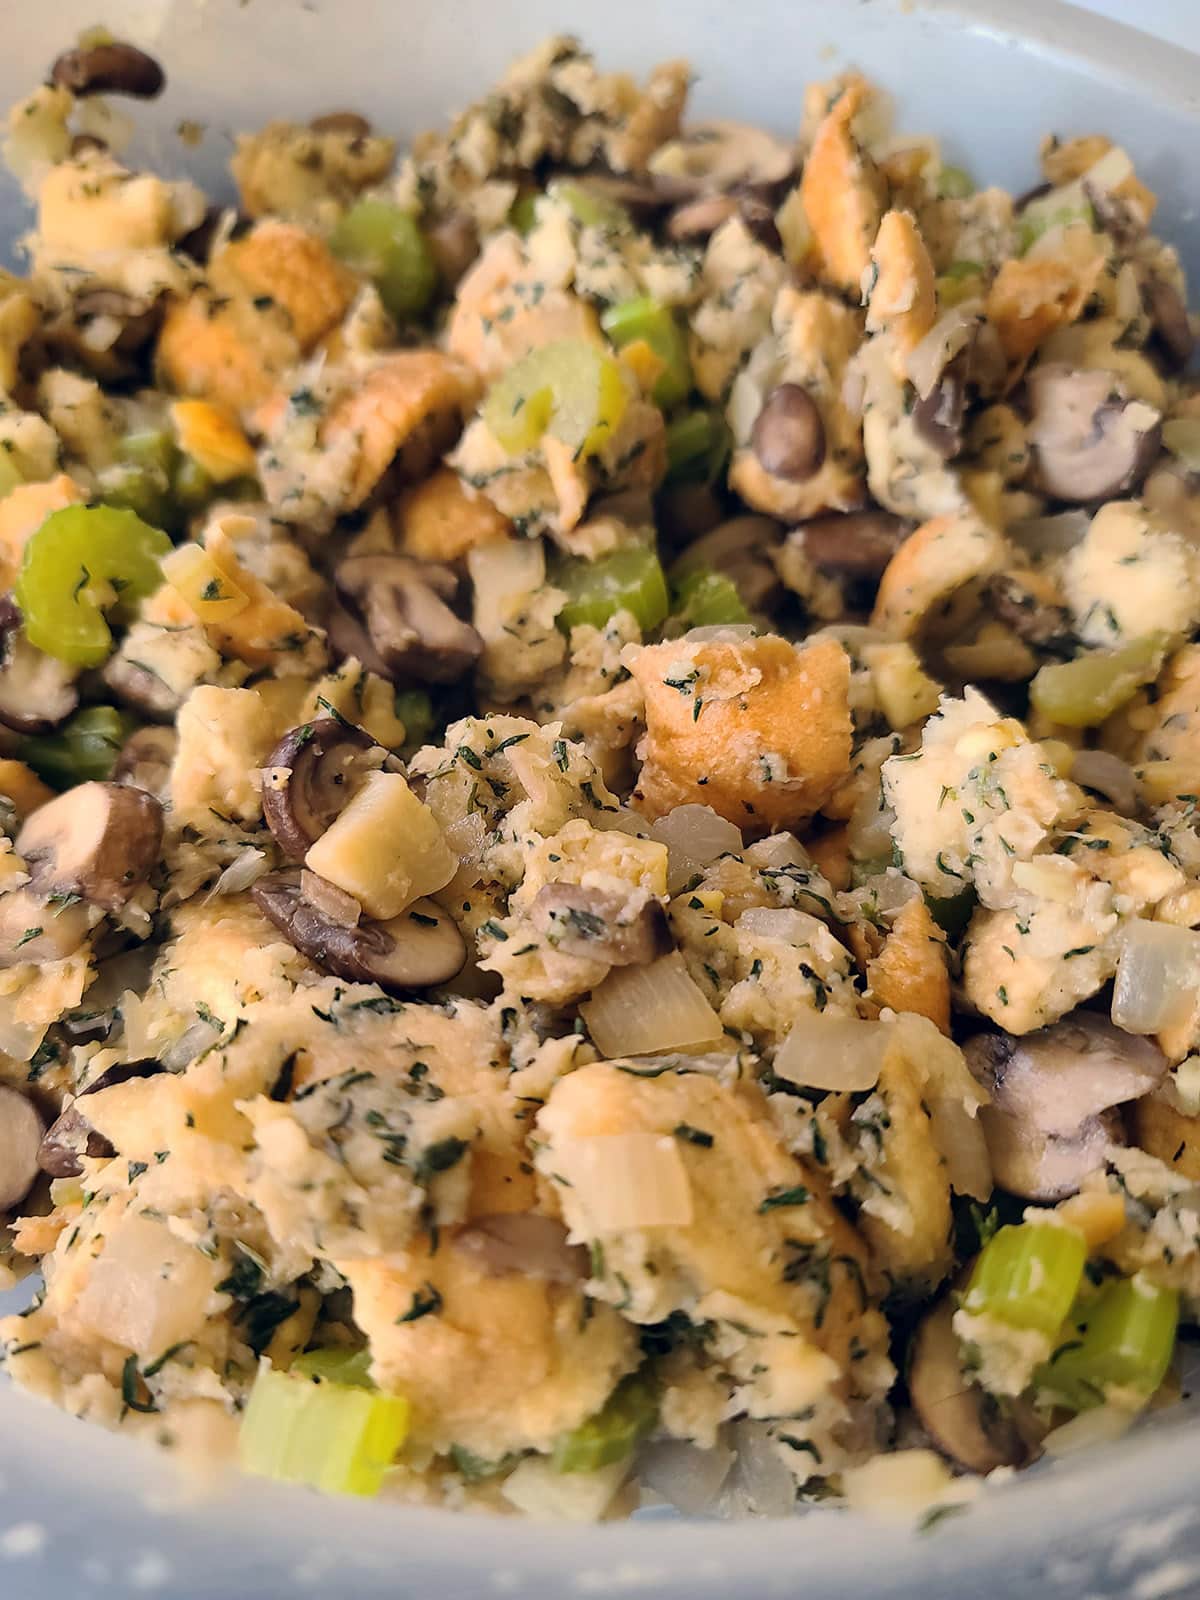 A close up view of a pan of stuffing.